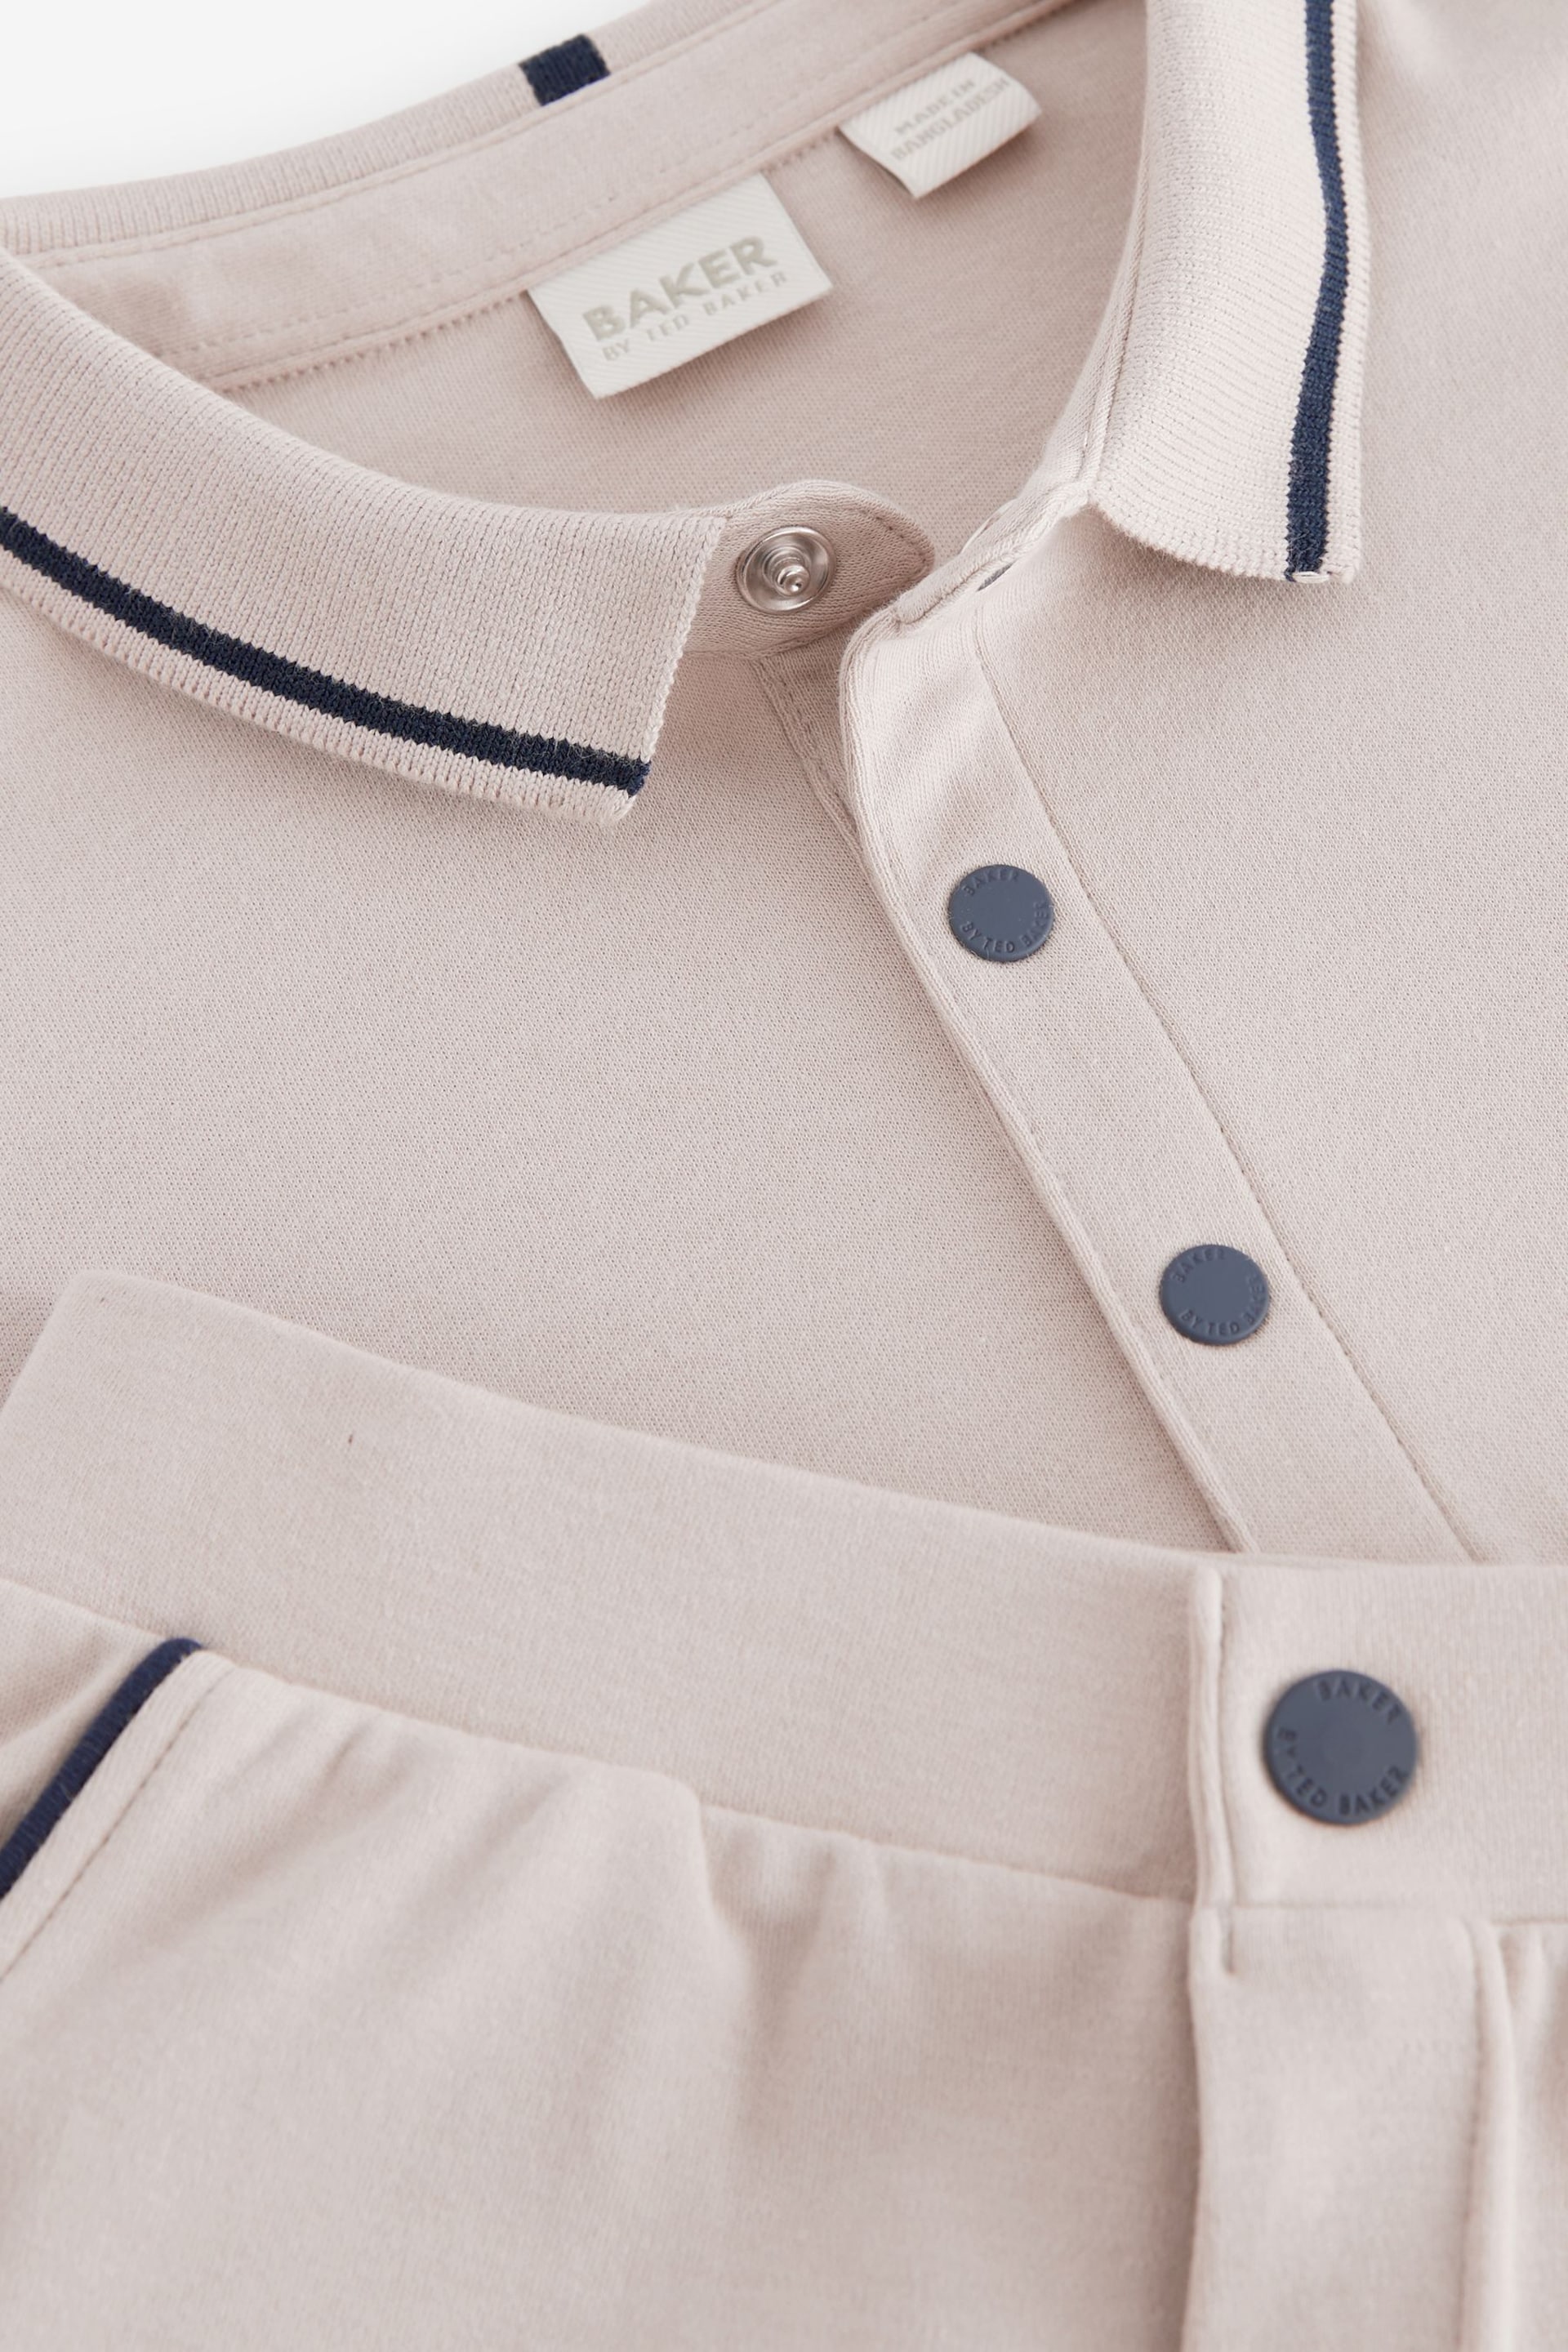 Baker by Ted Baker Stone Polo Shirt and Short Set - Image 7 of 8